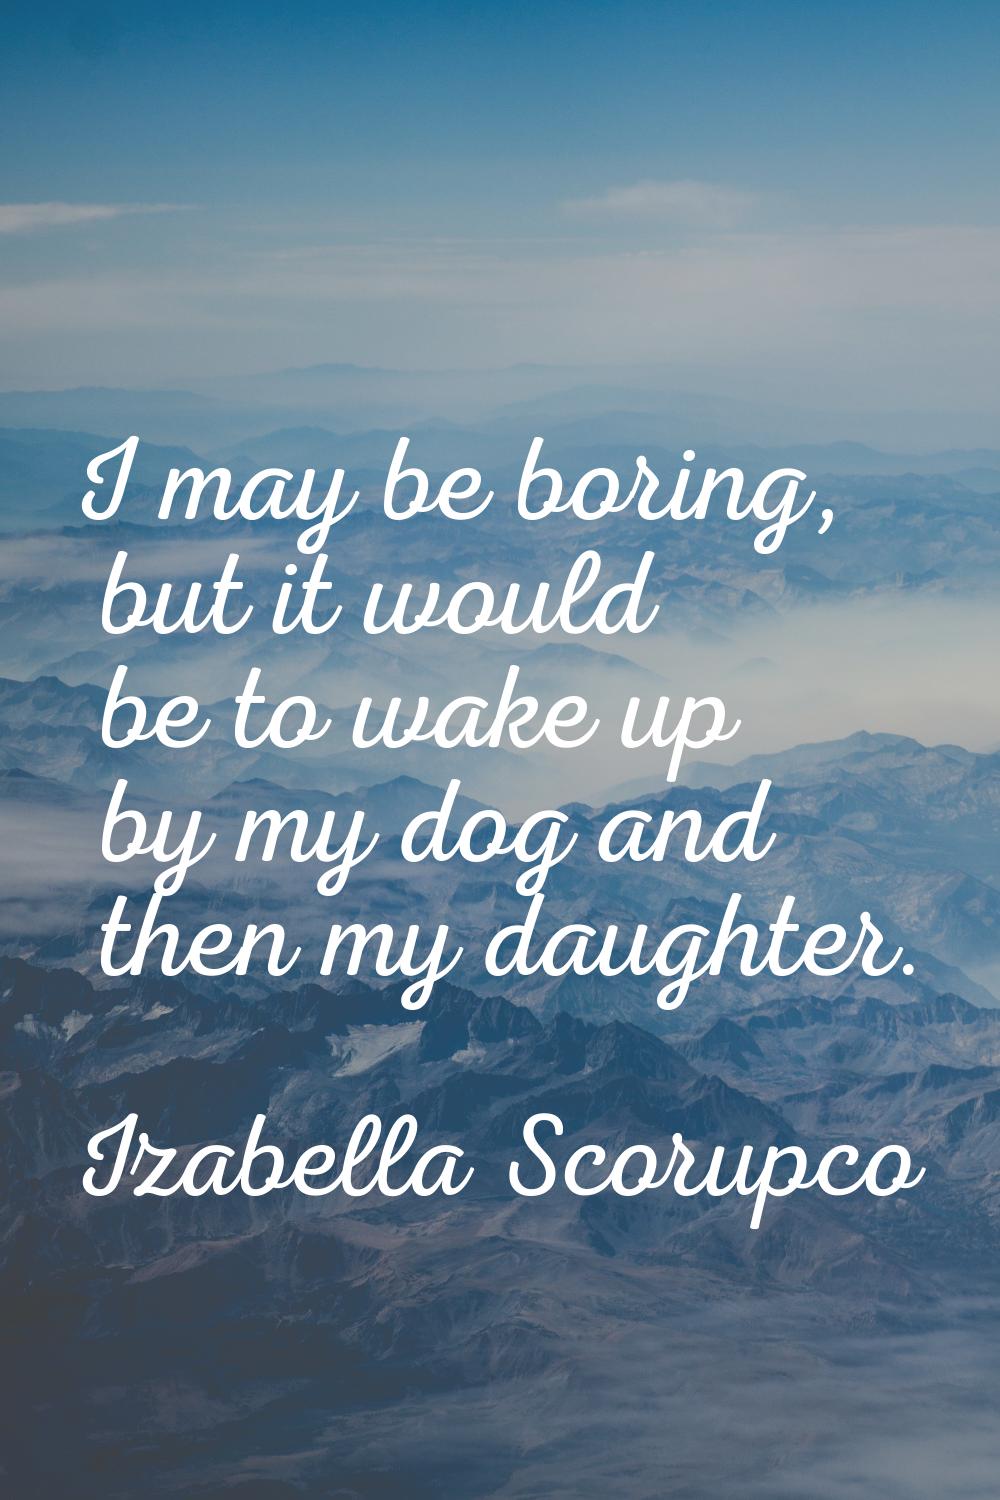 I may be boring, but it would be to wake up by my dog and then my daughter.